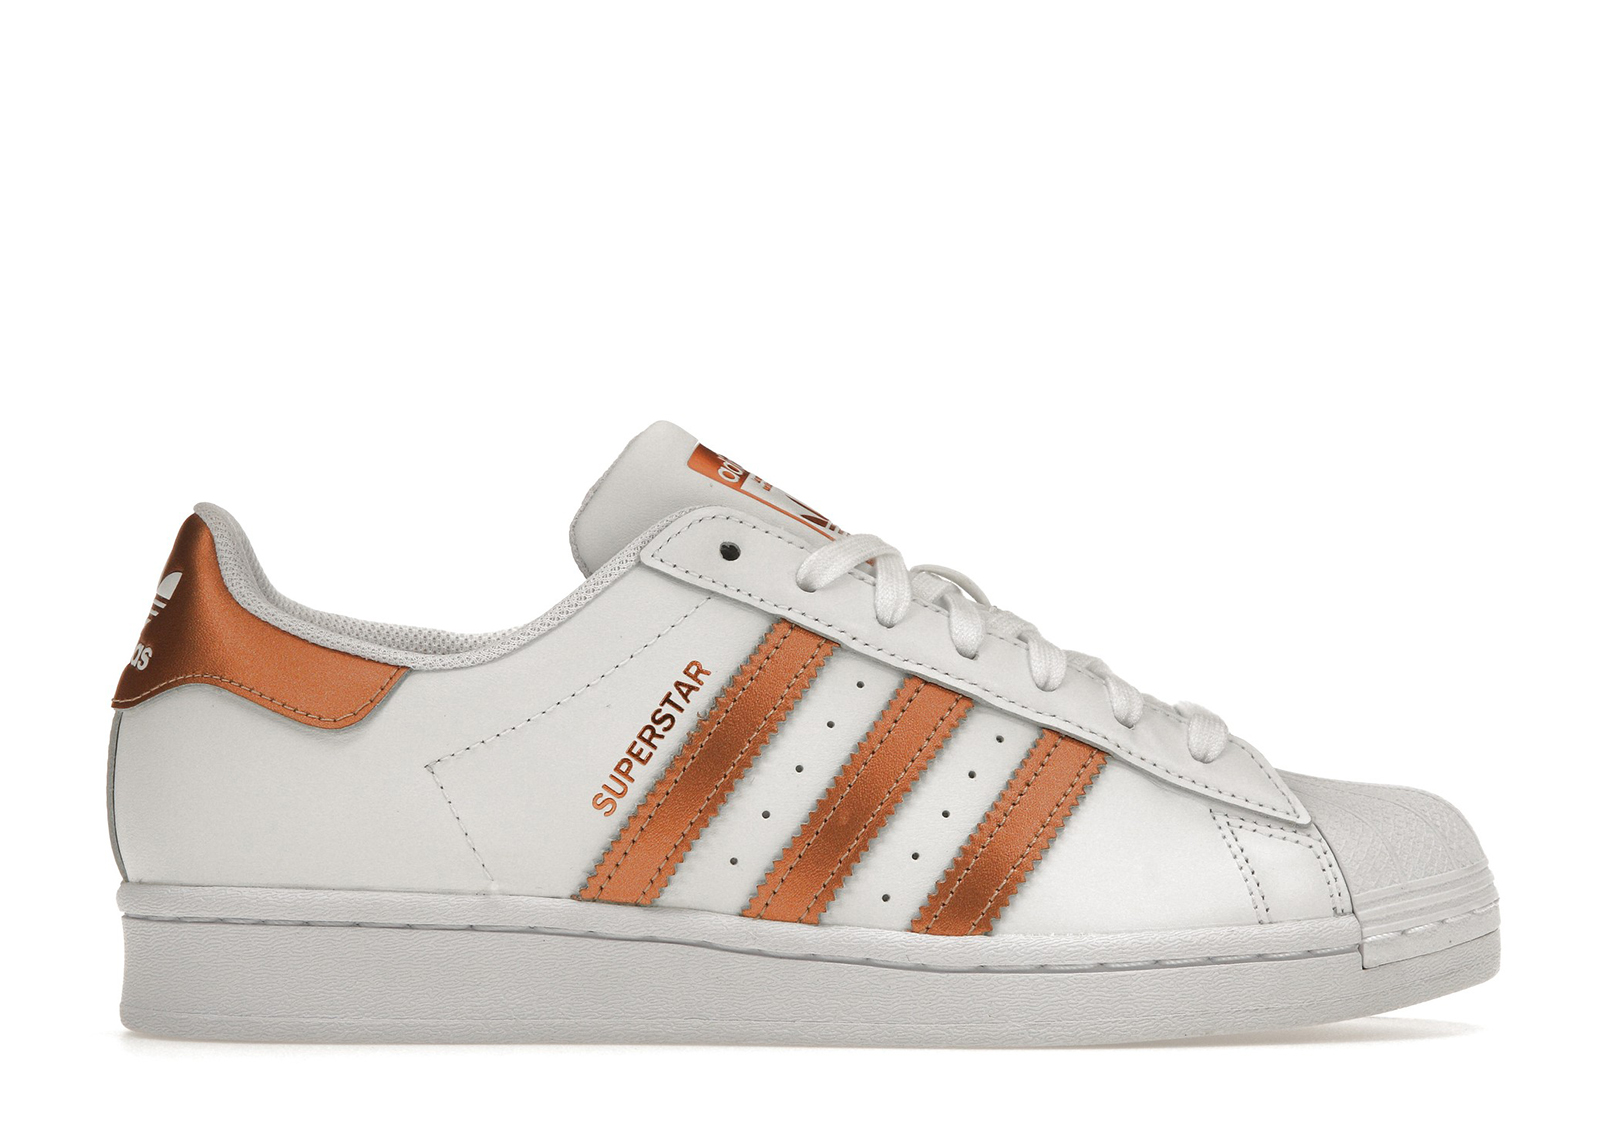 adidas superstar white and brown